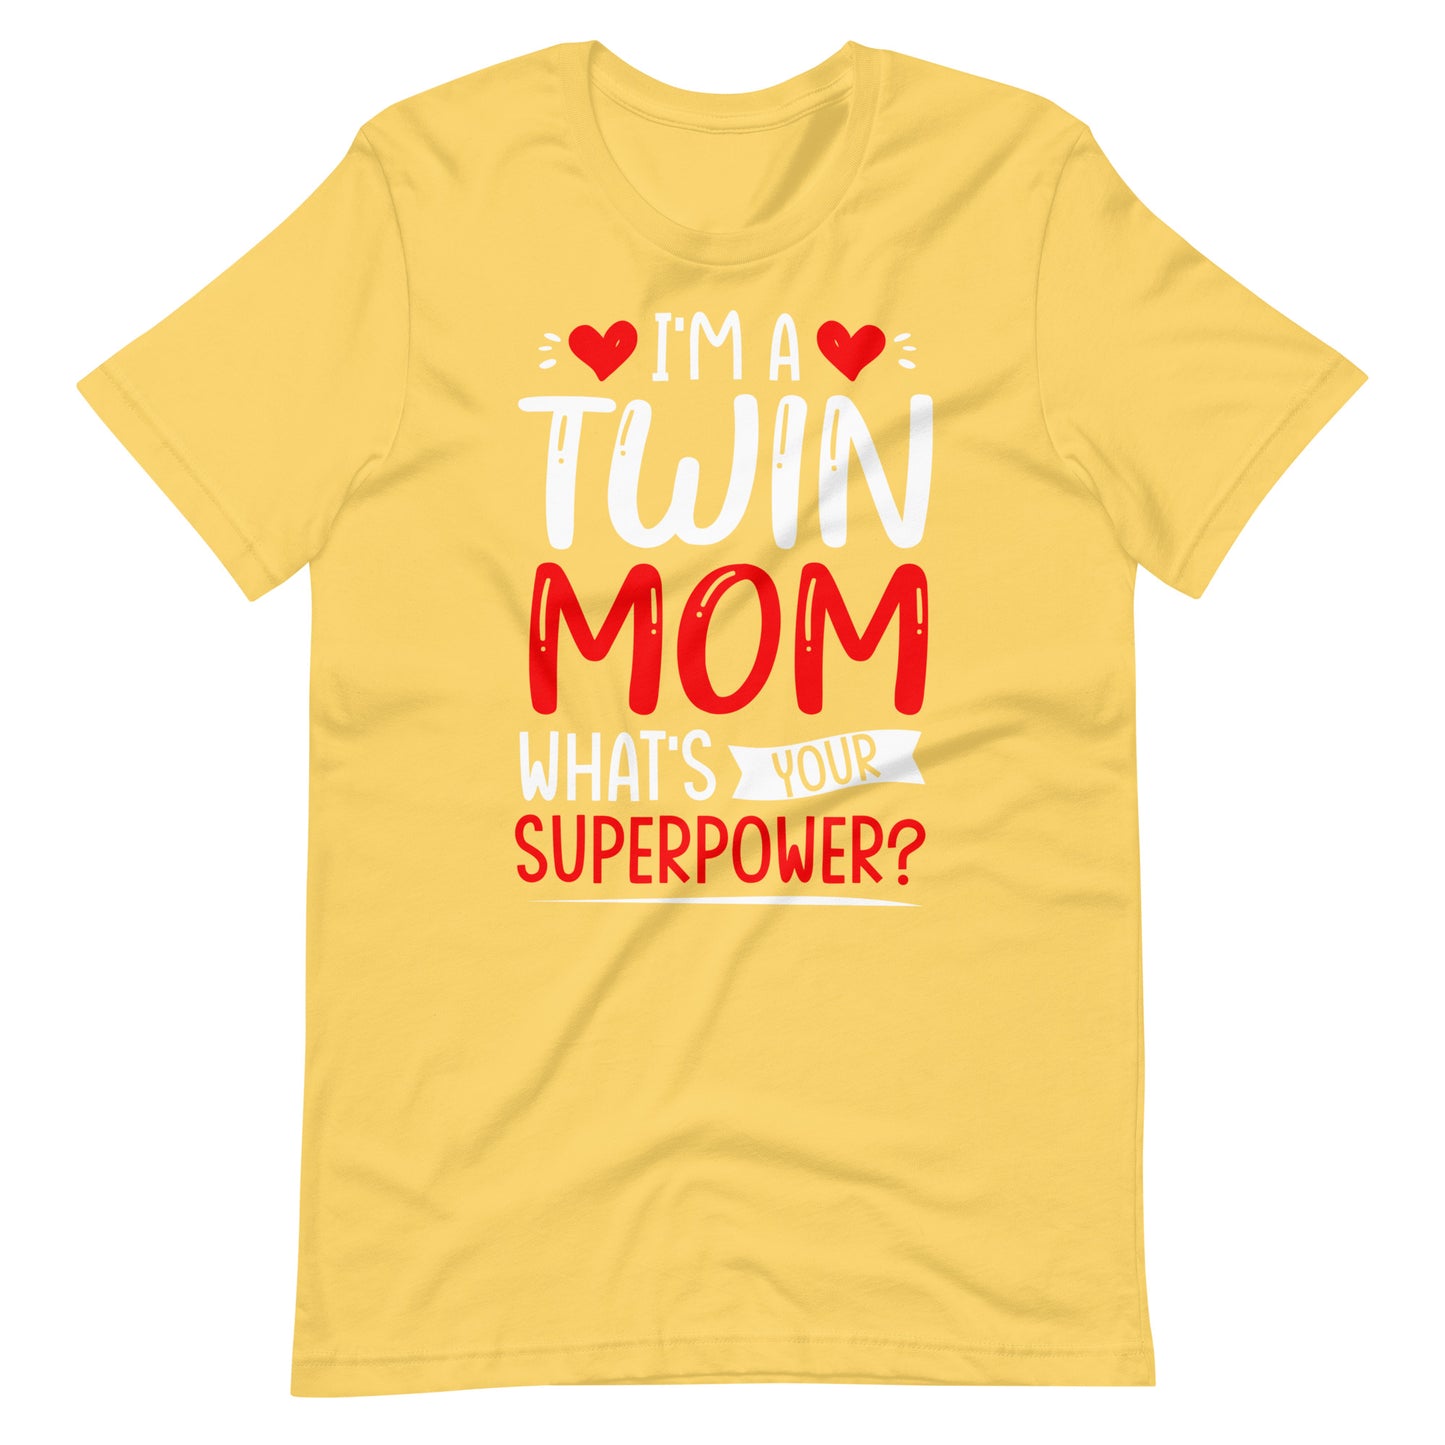 I'm A Twin Mom What's Your Superpower?